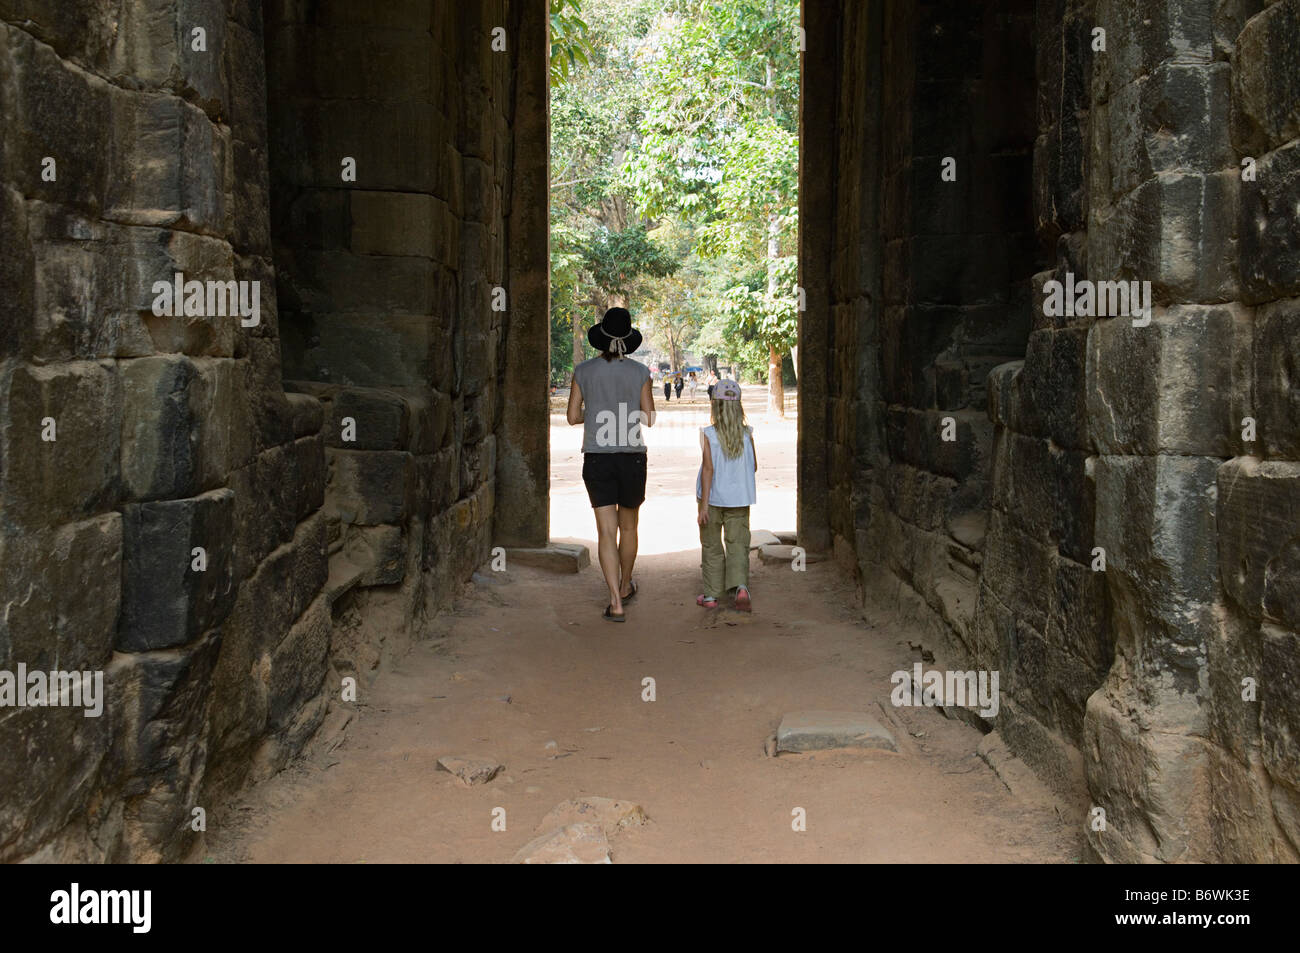 Woman and Girl Walking Through Passage in Ancient Building Stock Photo